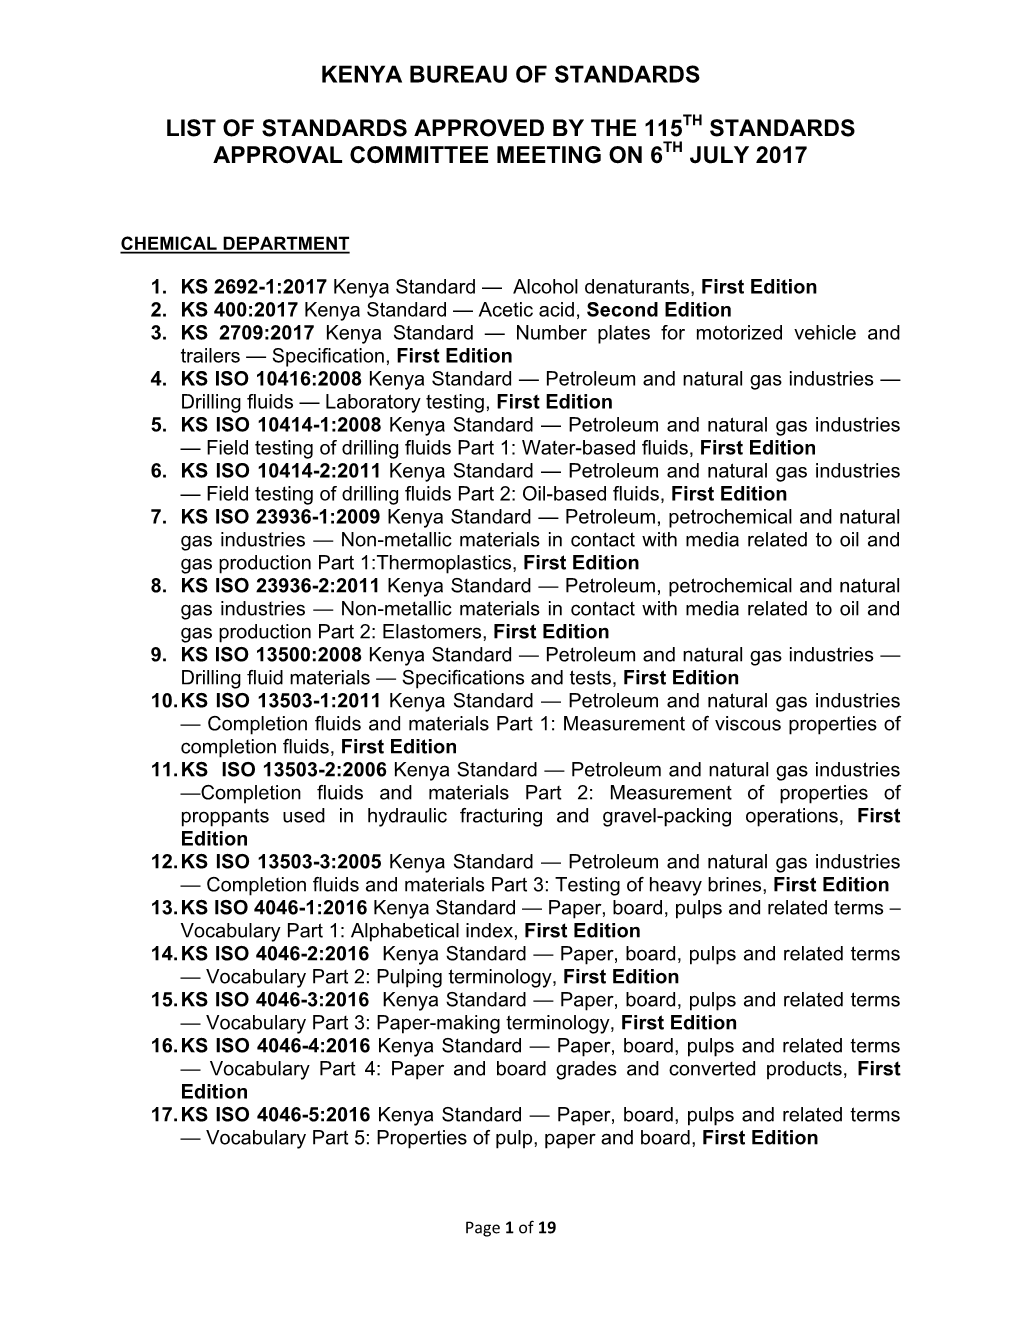 Approved List of Stds SAC July 2017